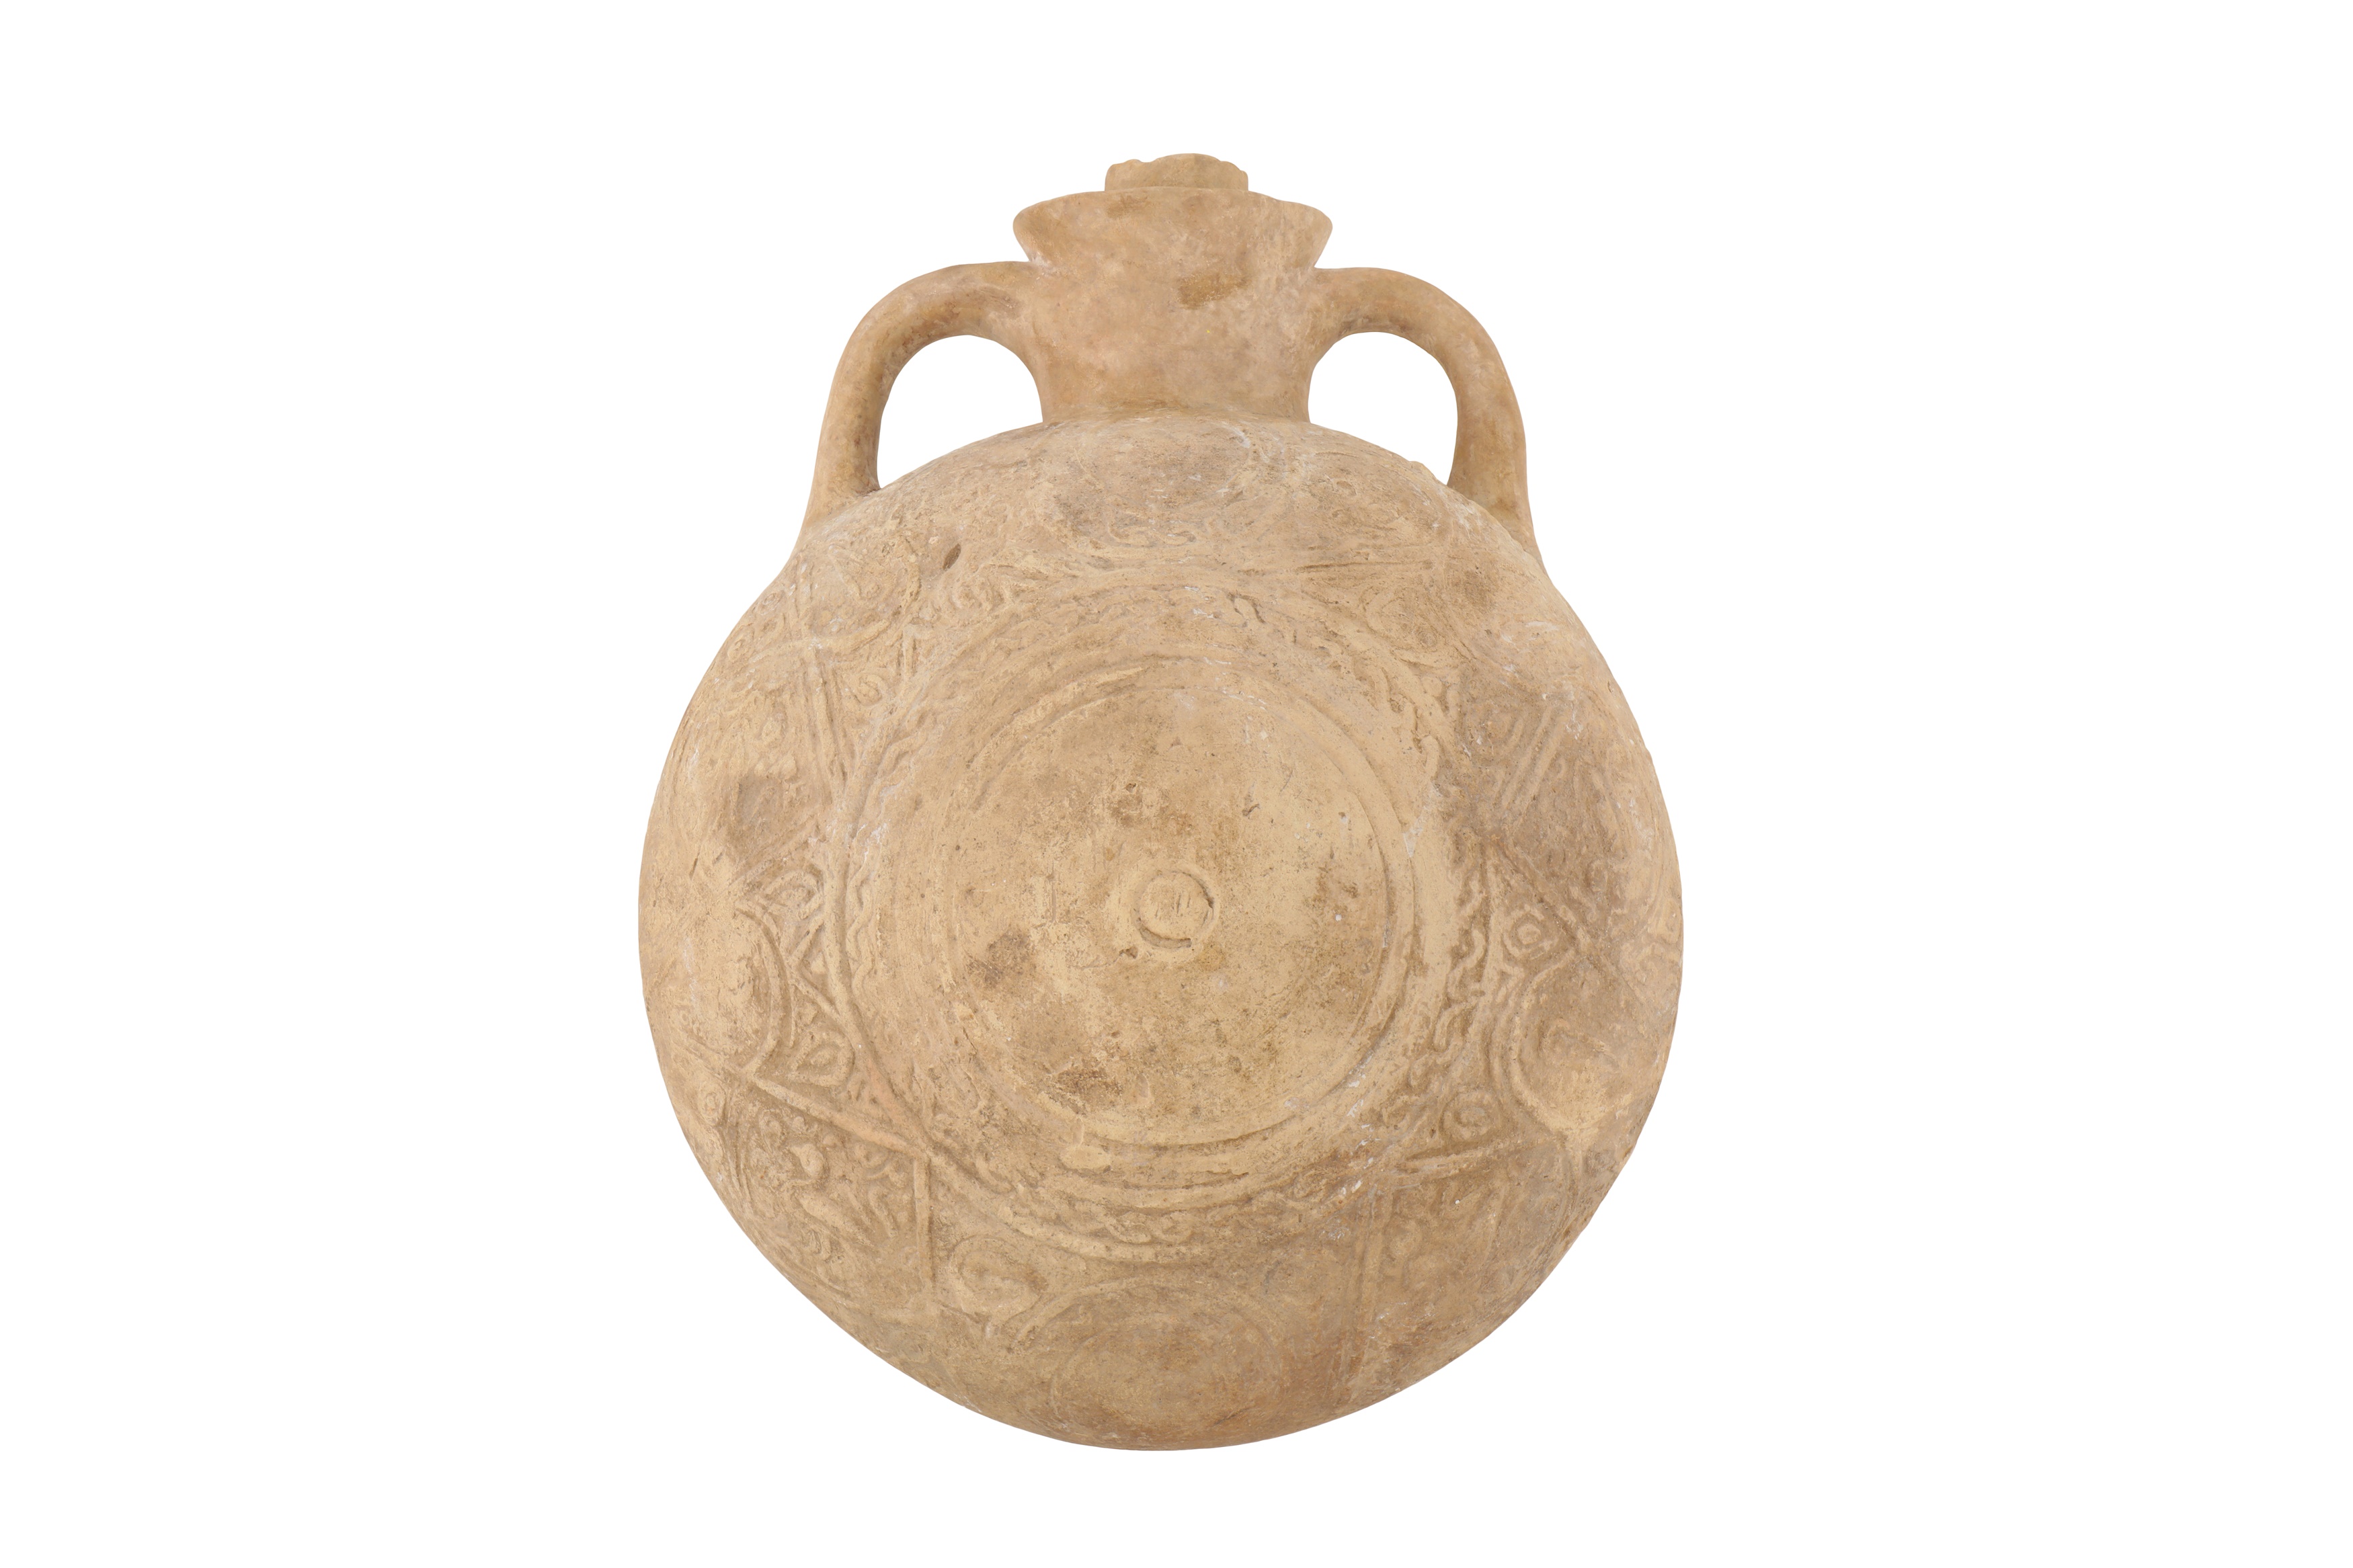 A 12TH-14TH CENTURY PERSIAN UNGLAZED MOULDED POTTERY PILGRIM FLASK